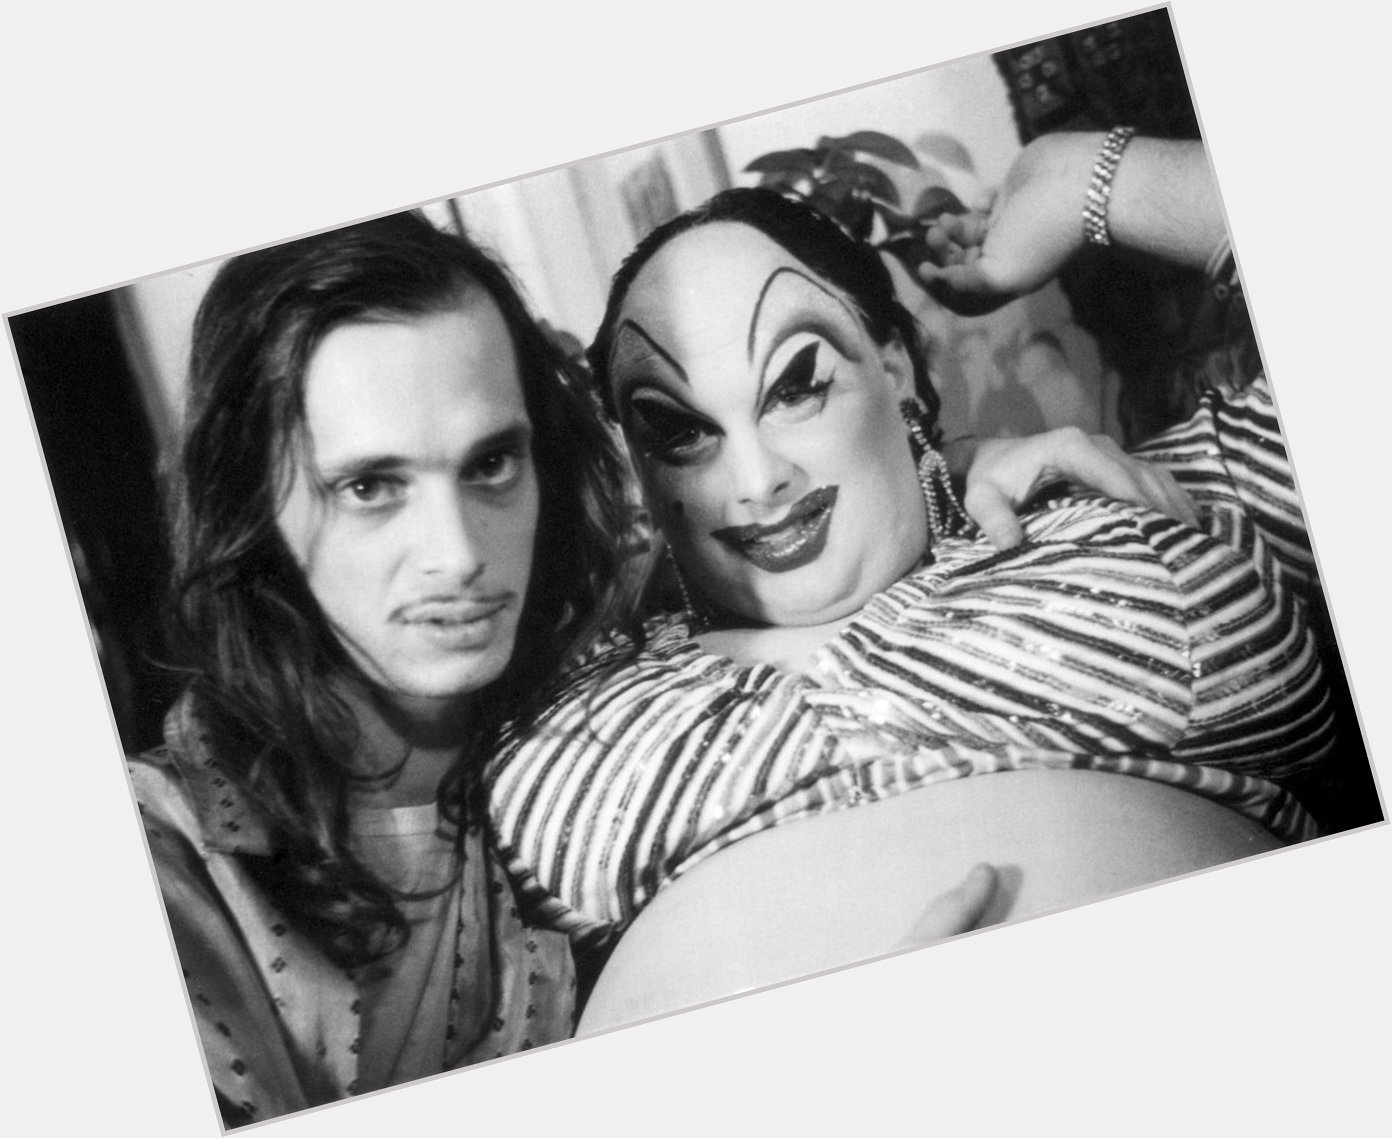 \" Happy birthday to very offensive, very trashy, and always very entertaining John Waters!              